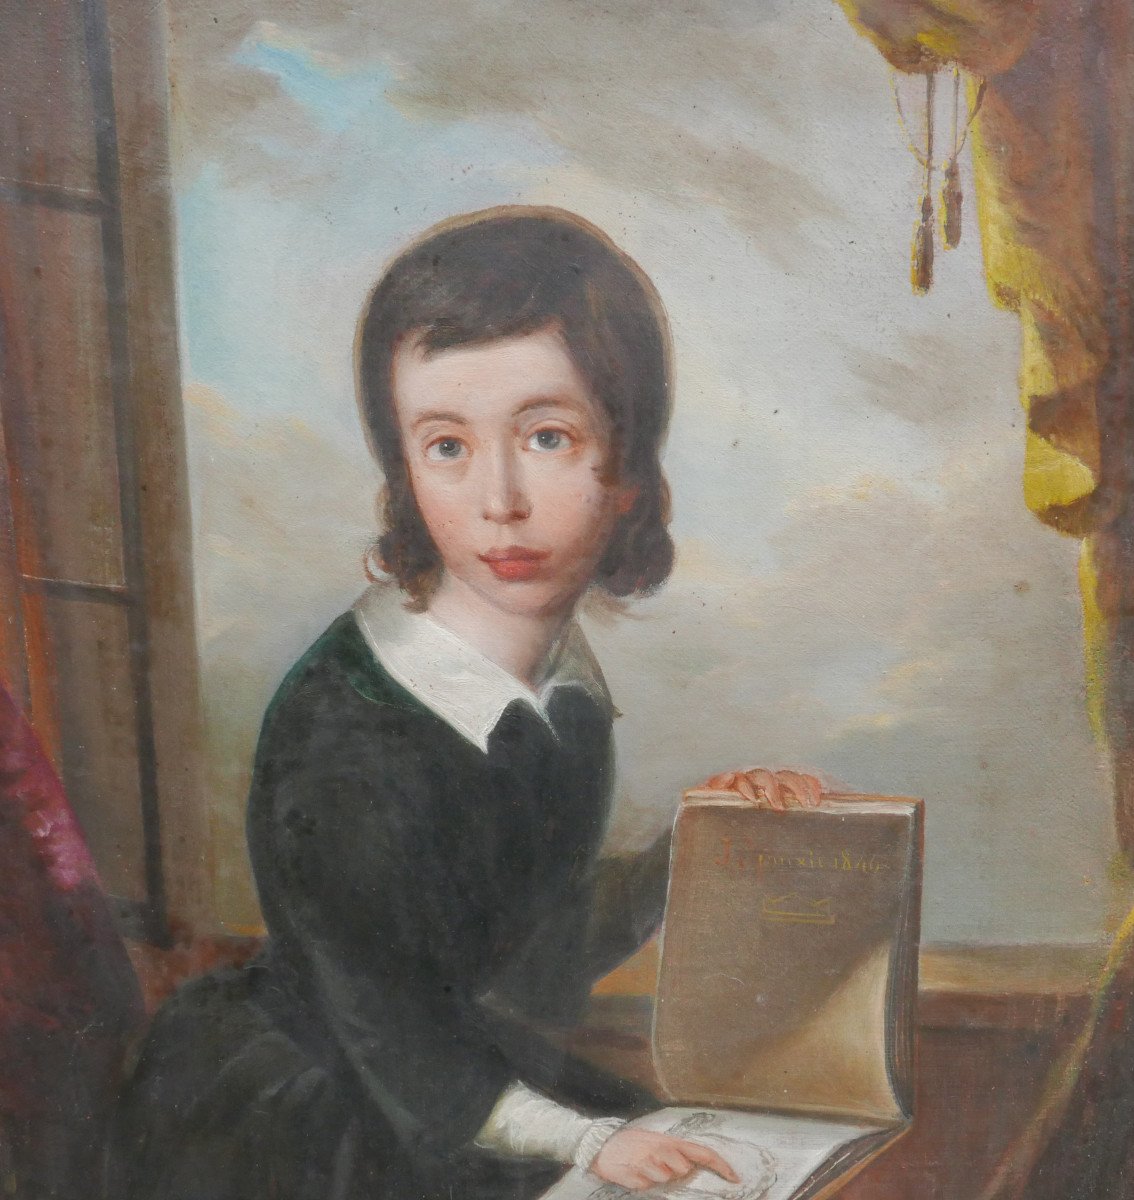 Portrait Of Young Woman Reading Oil/canvas From The 19th Century-photo-4